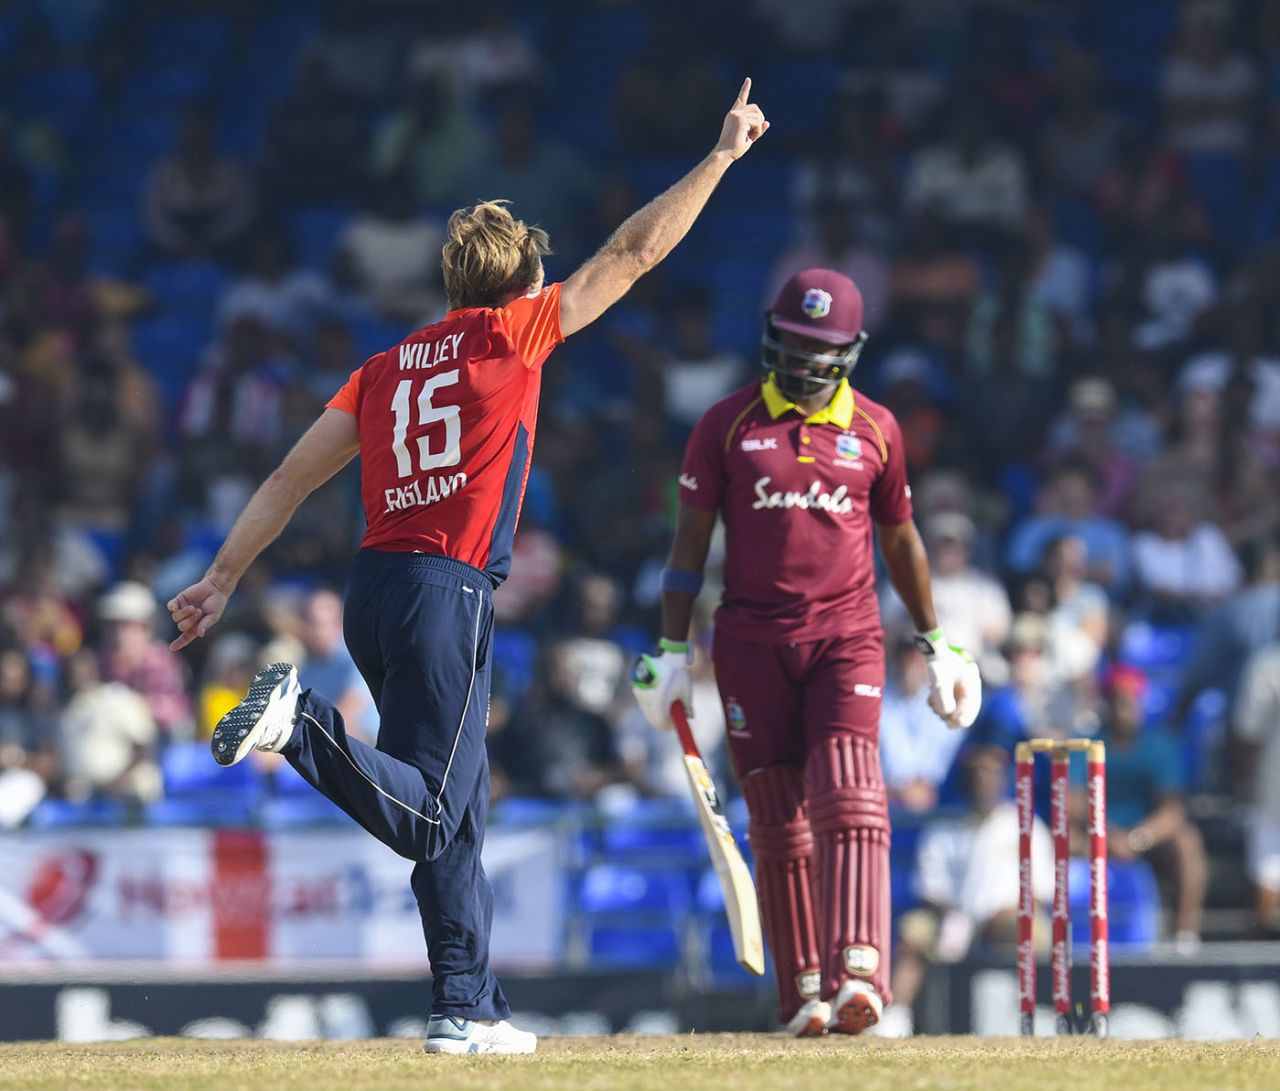 David Willey claimed a four-wicket haul, West Indies v England, 3rd T20I, St Kitts, March 10, 2019